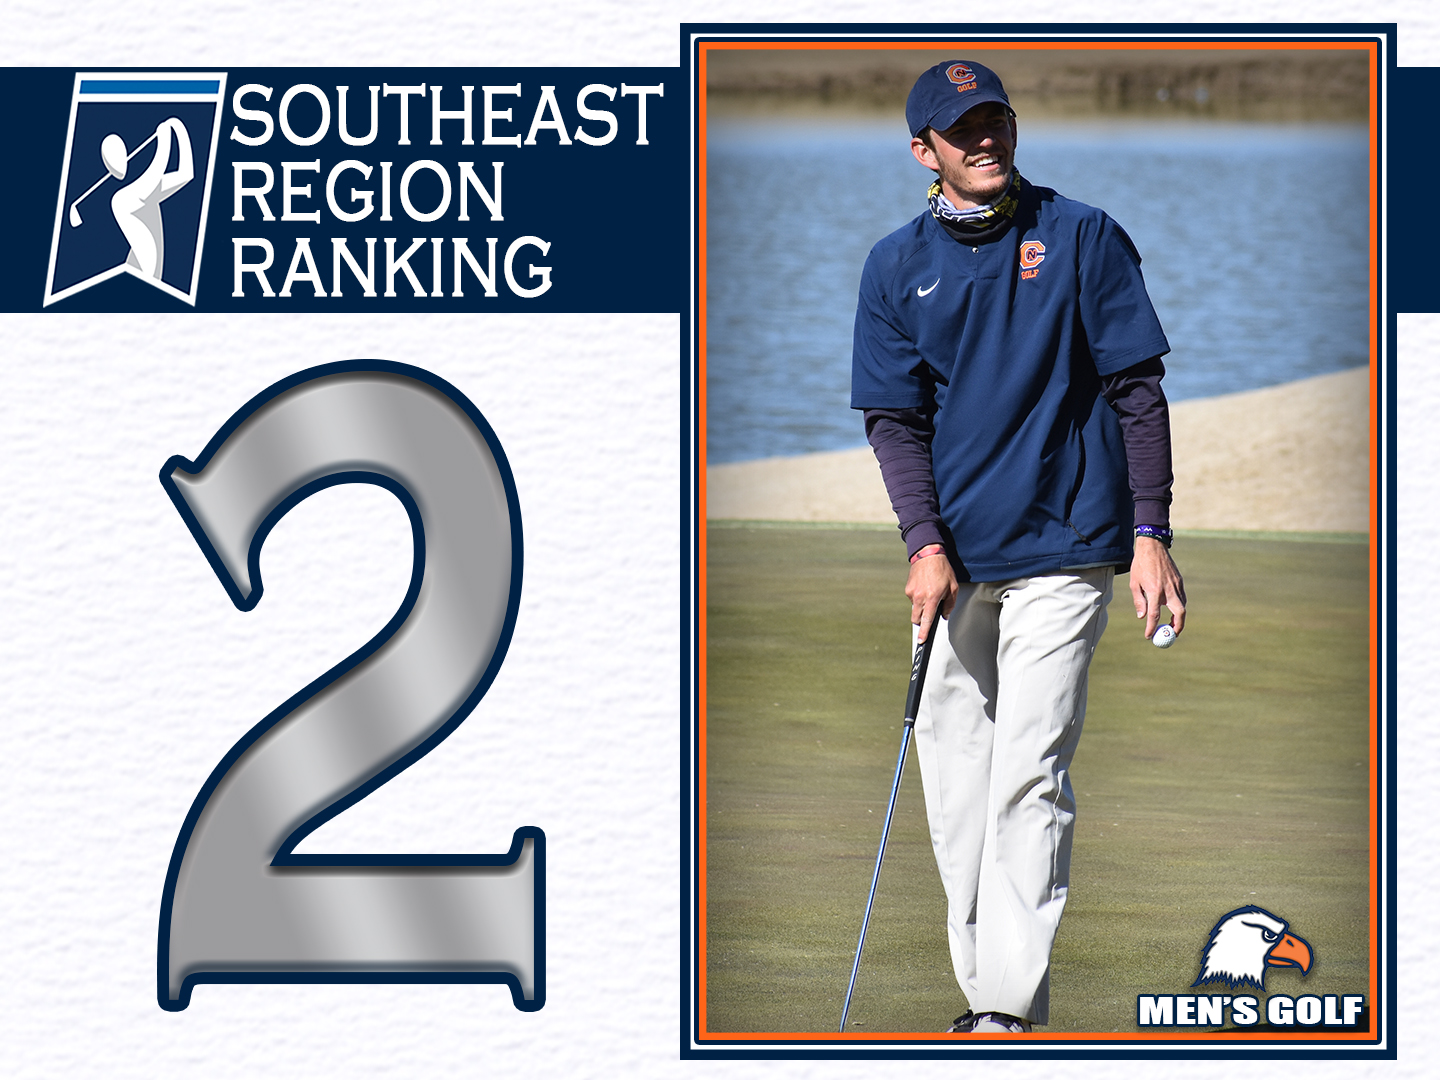 Eagles remain at second in Southeast Region ranking